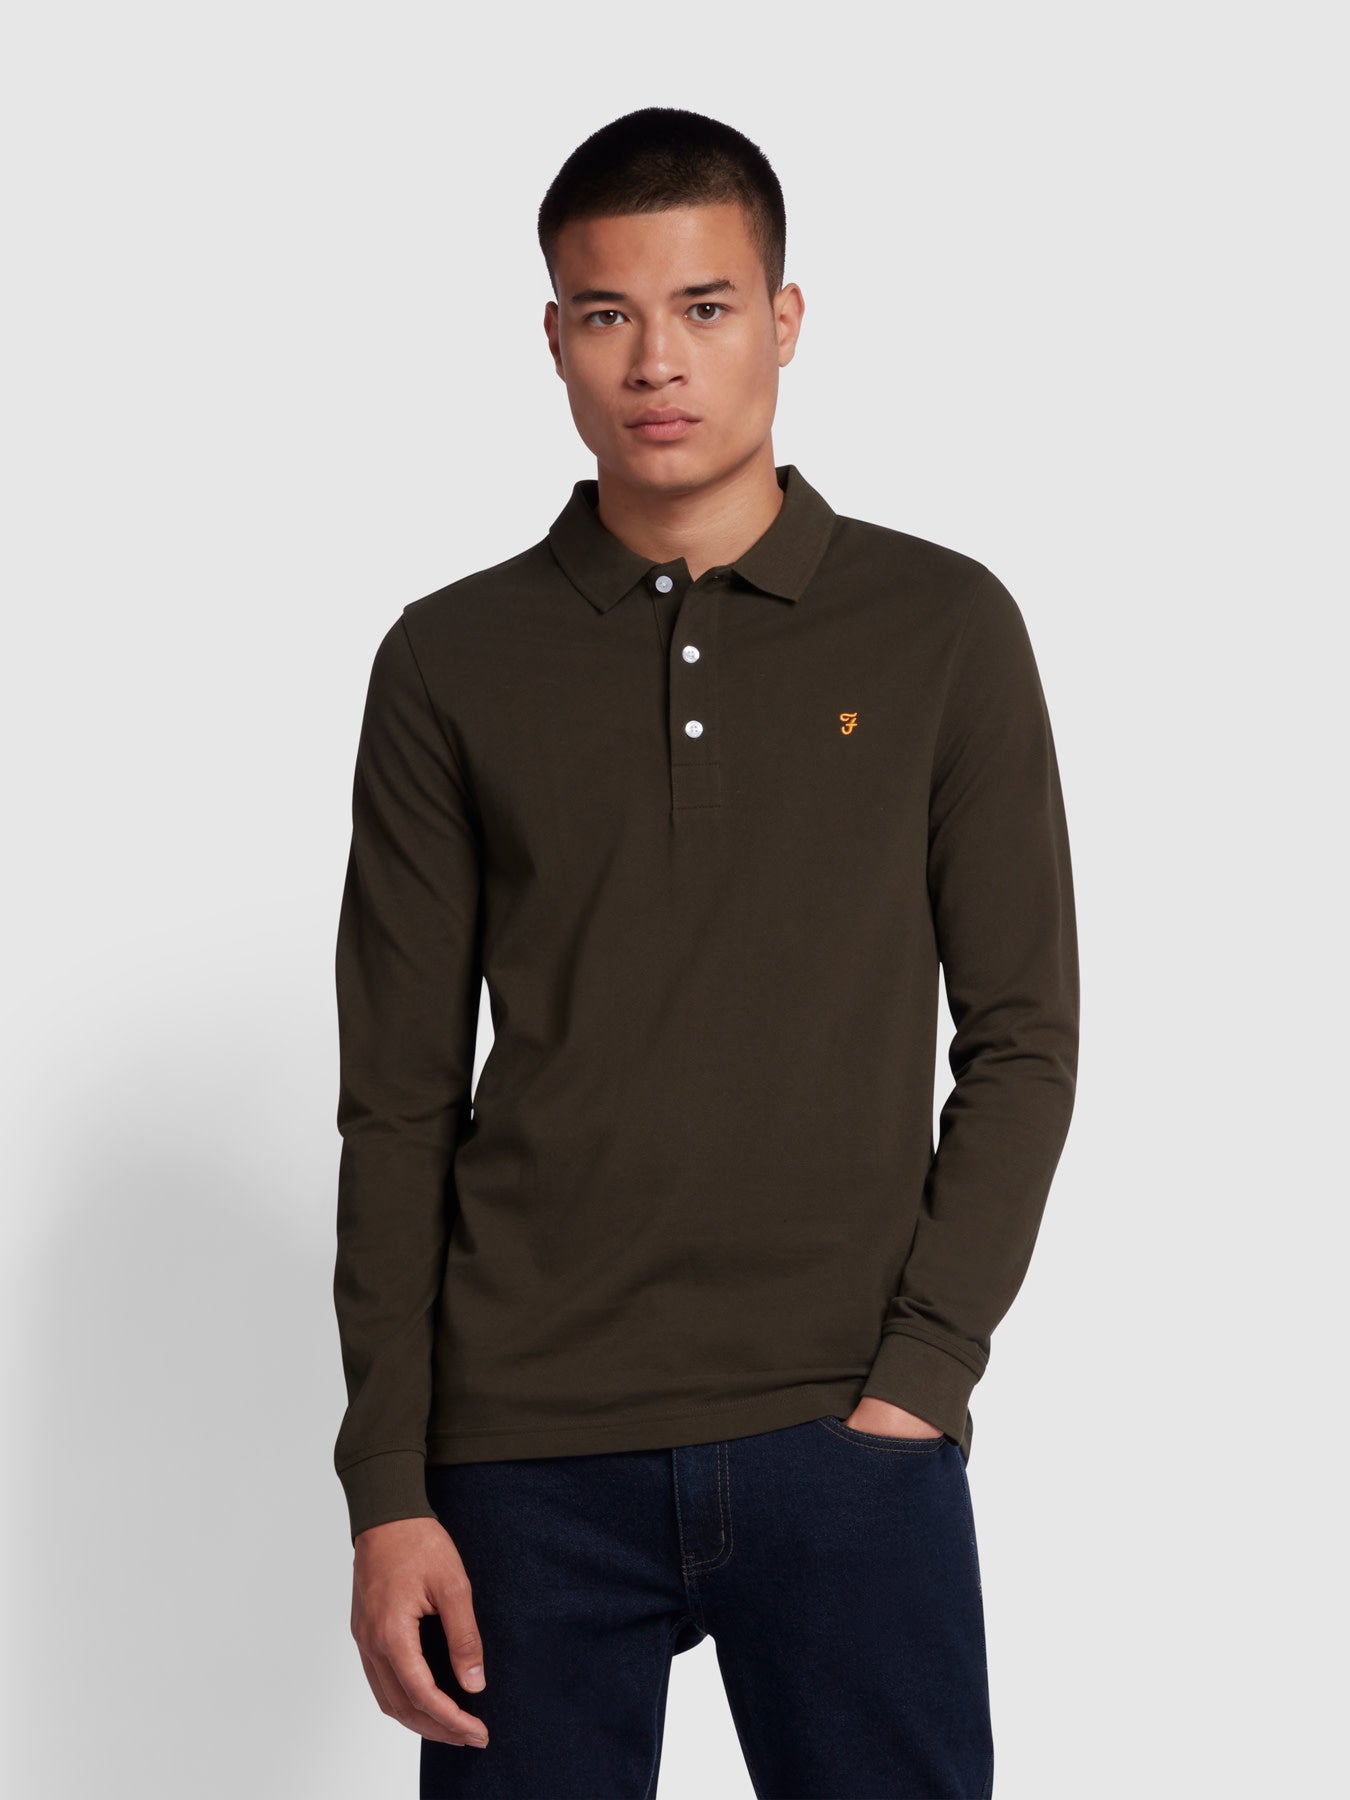 View Blanes Organic Cotton Long Sleeve Polo Shirt In Evergreen information